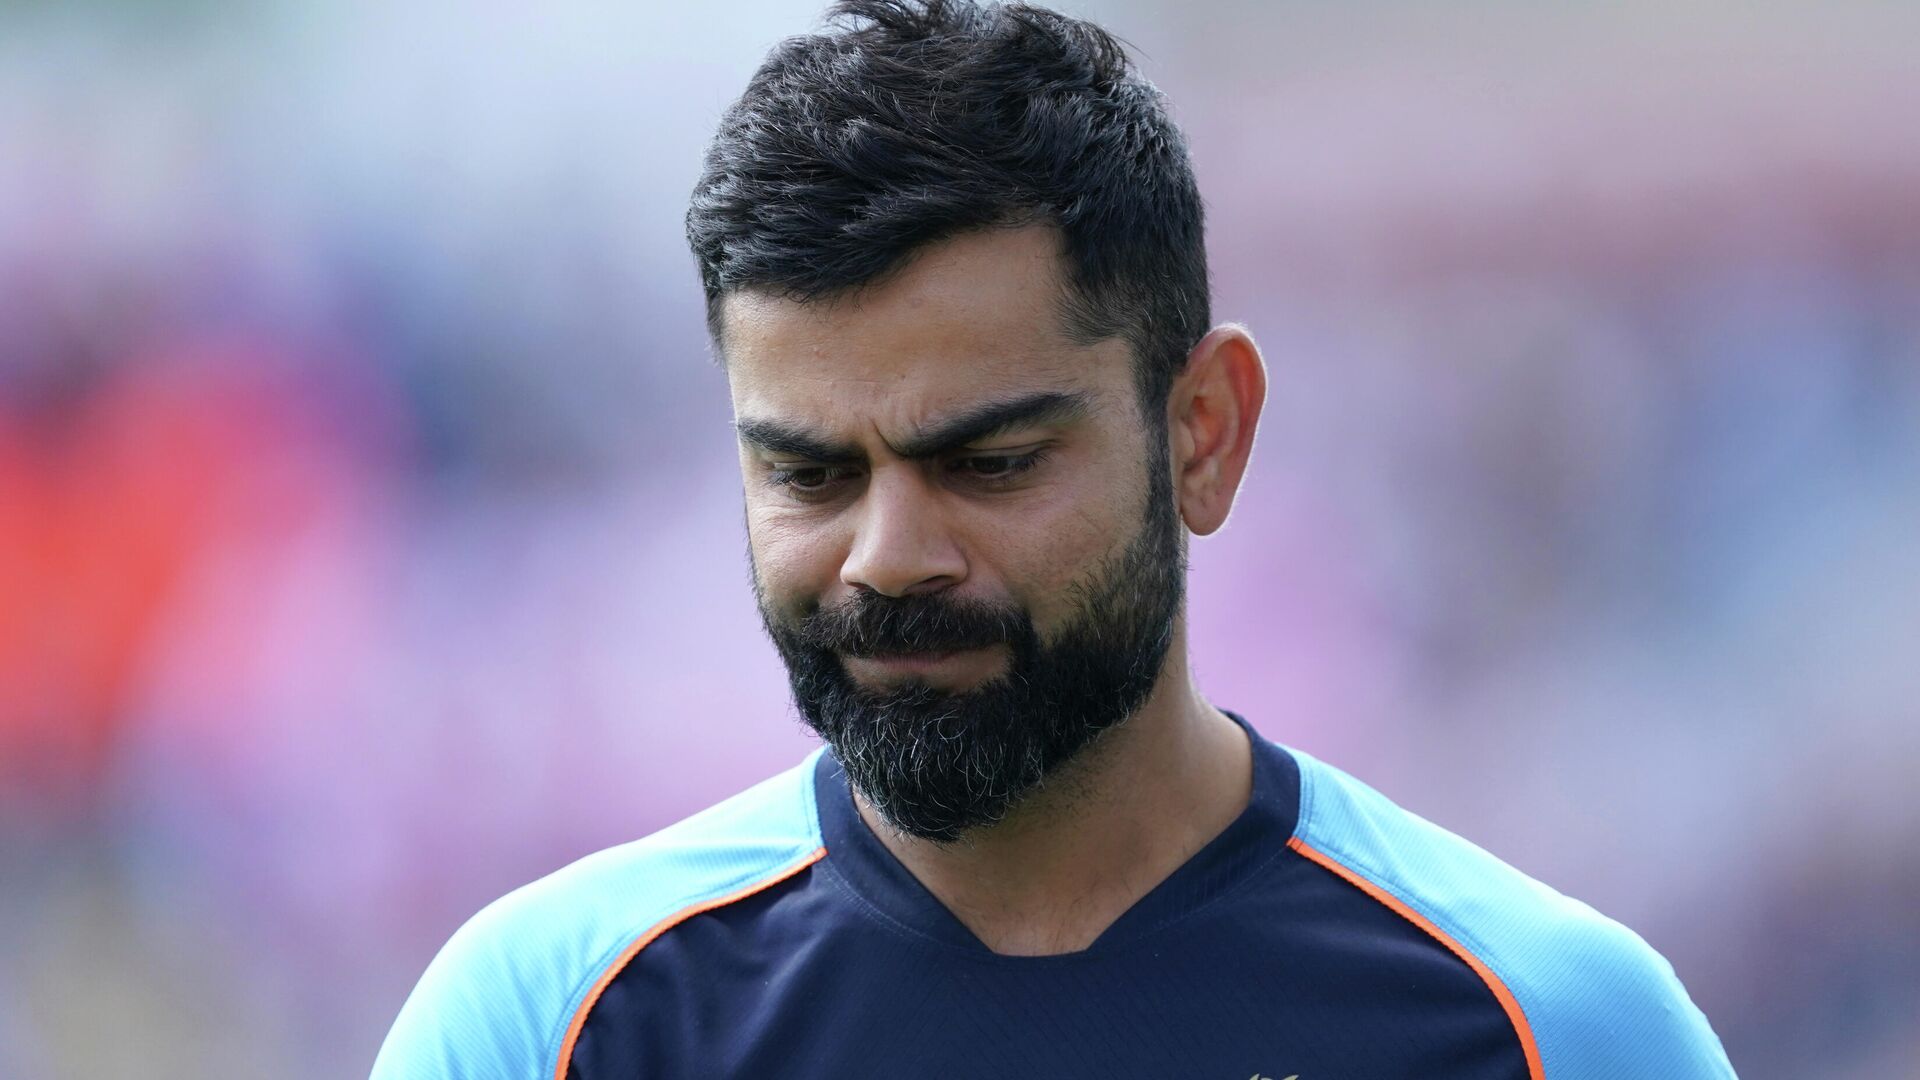 India's captain Virat Kohli reacts during the presentation ceremony after their loss on the fourth day of third test cricket match between England and India, at Headingley cricket ground in Leeds, England, Saturday, Aug. 28, 2021 - Sputnik International, 1920, 12.10.2021